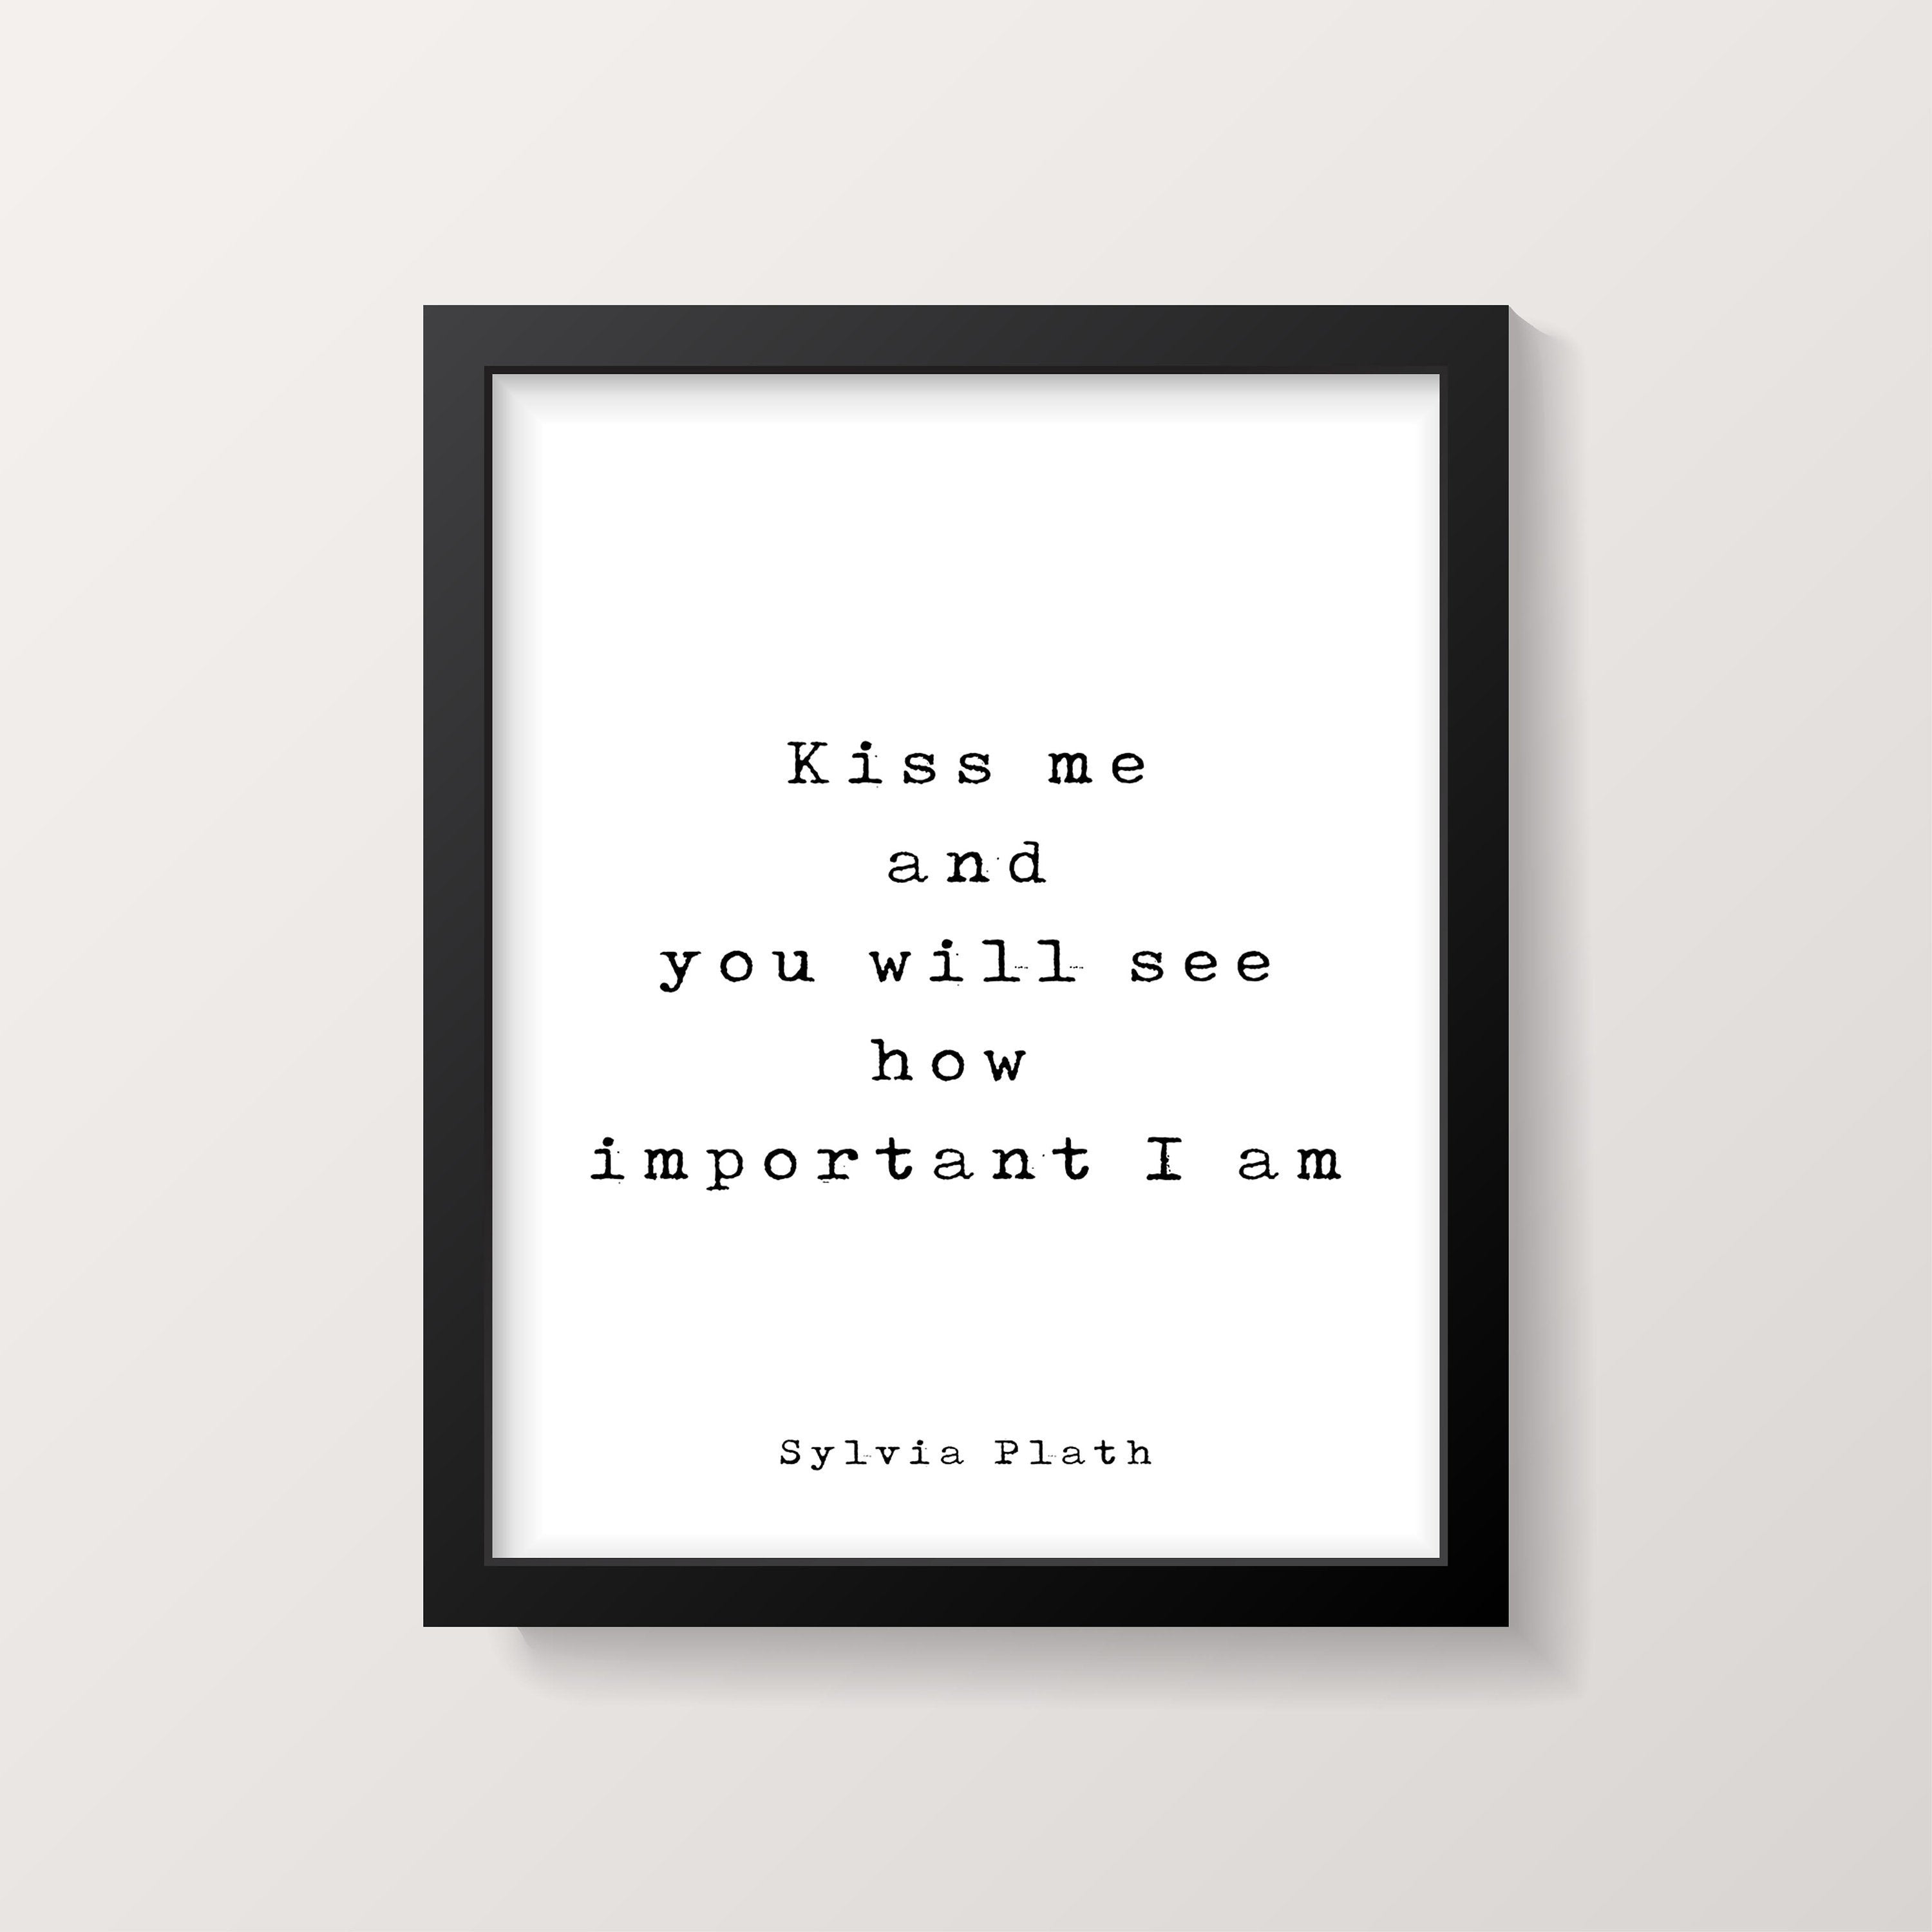 Sylvia Plath Love Quote, Kiss me and you will see how important I am, Unabridged Journals quote print, Library Art, writers gift, Unframed - BookQuoteDecor